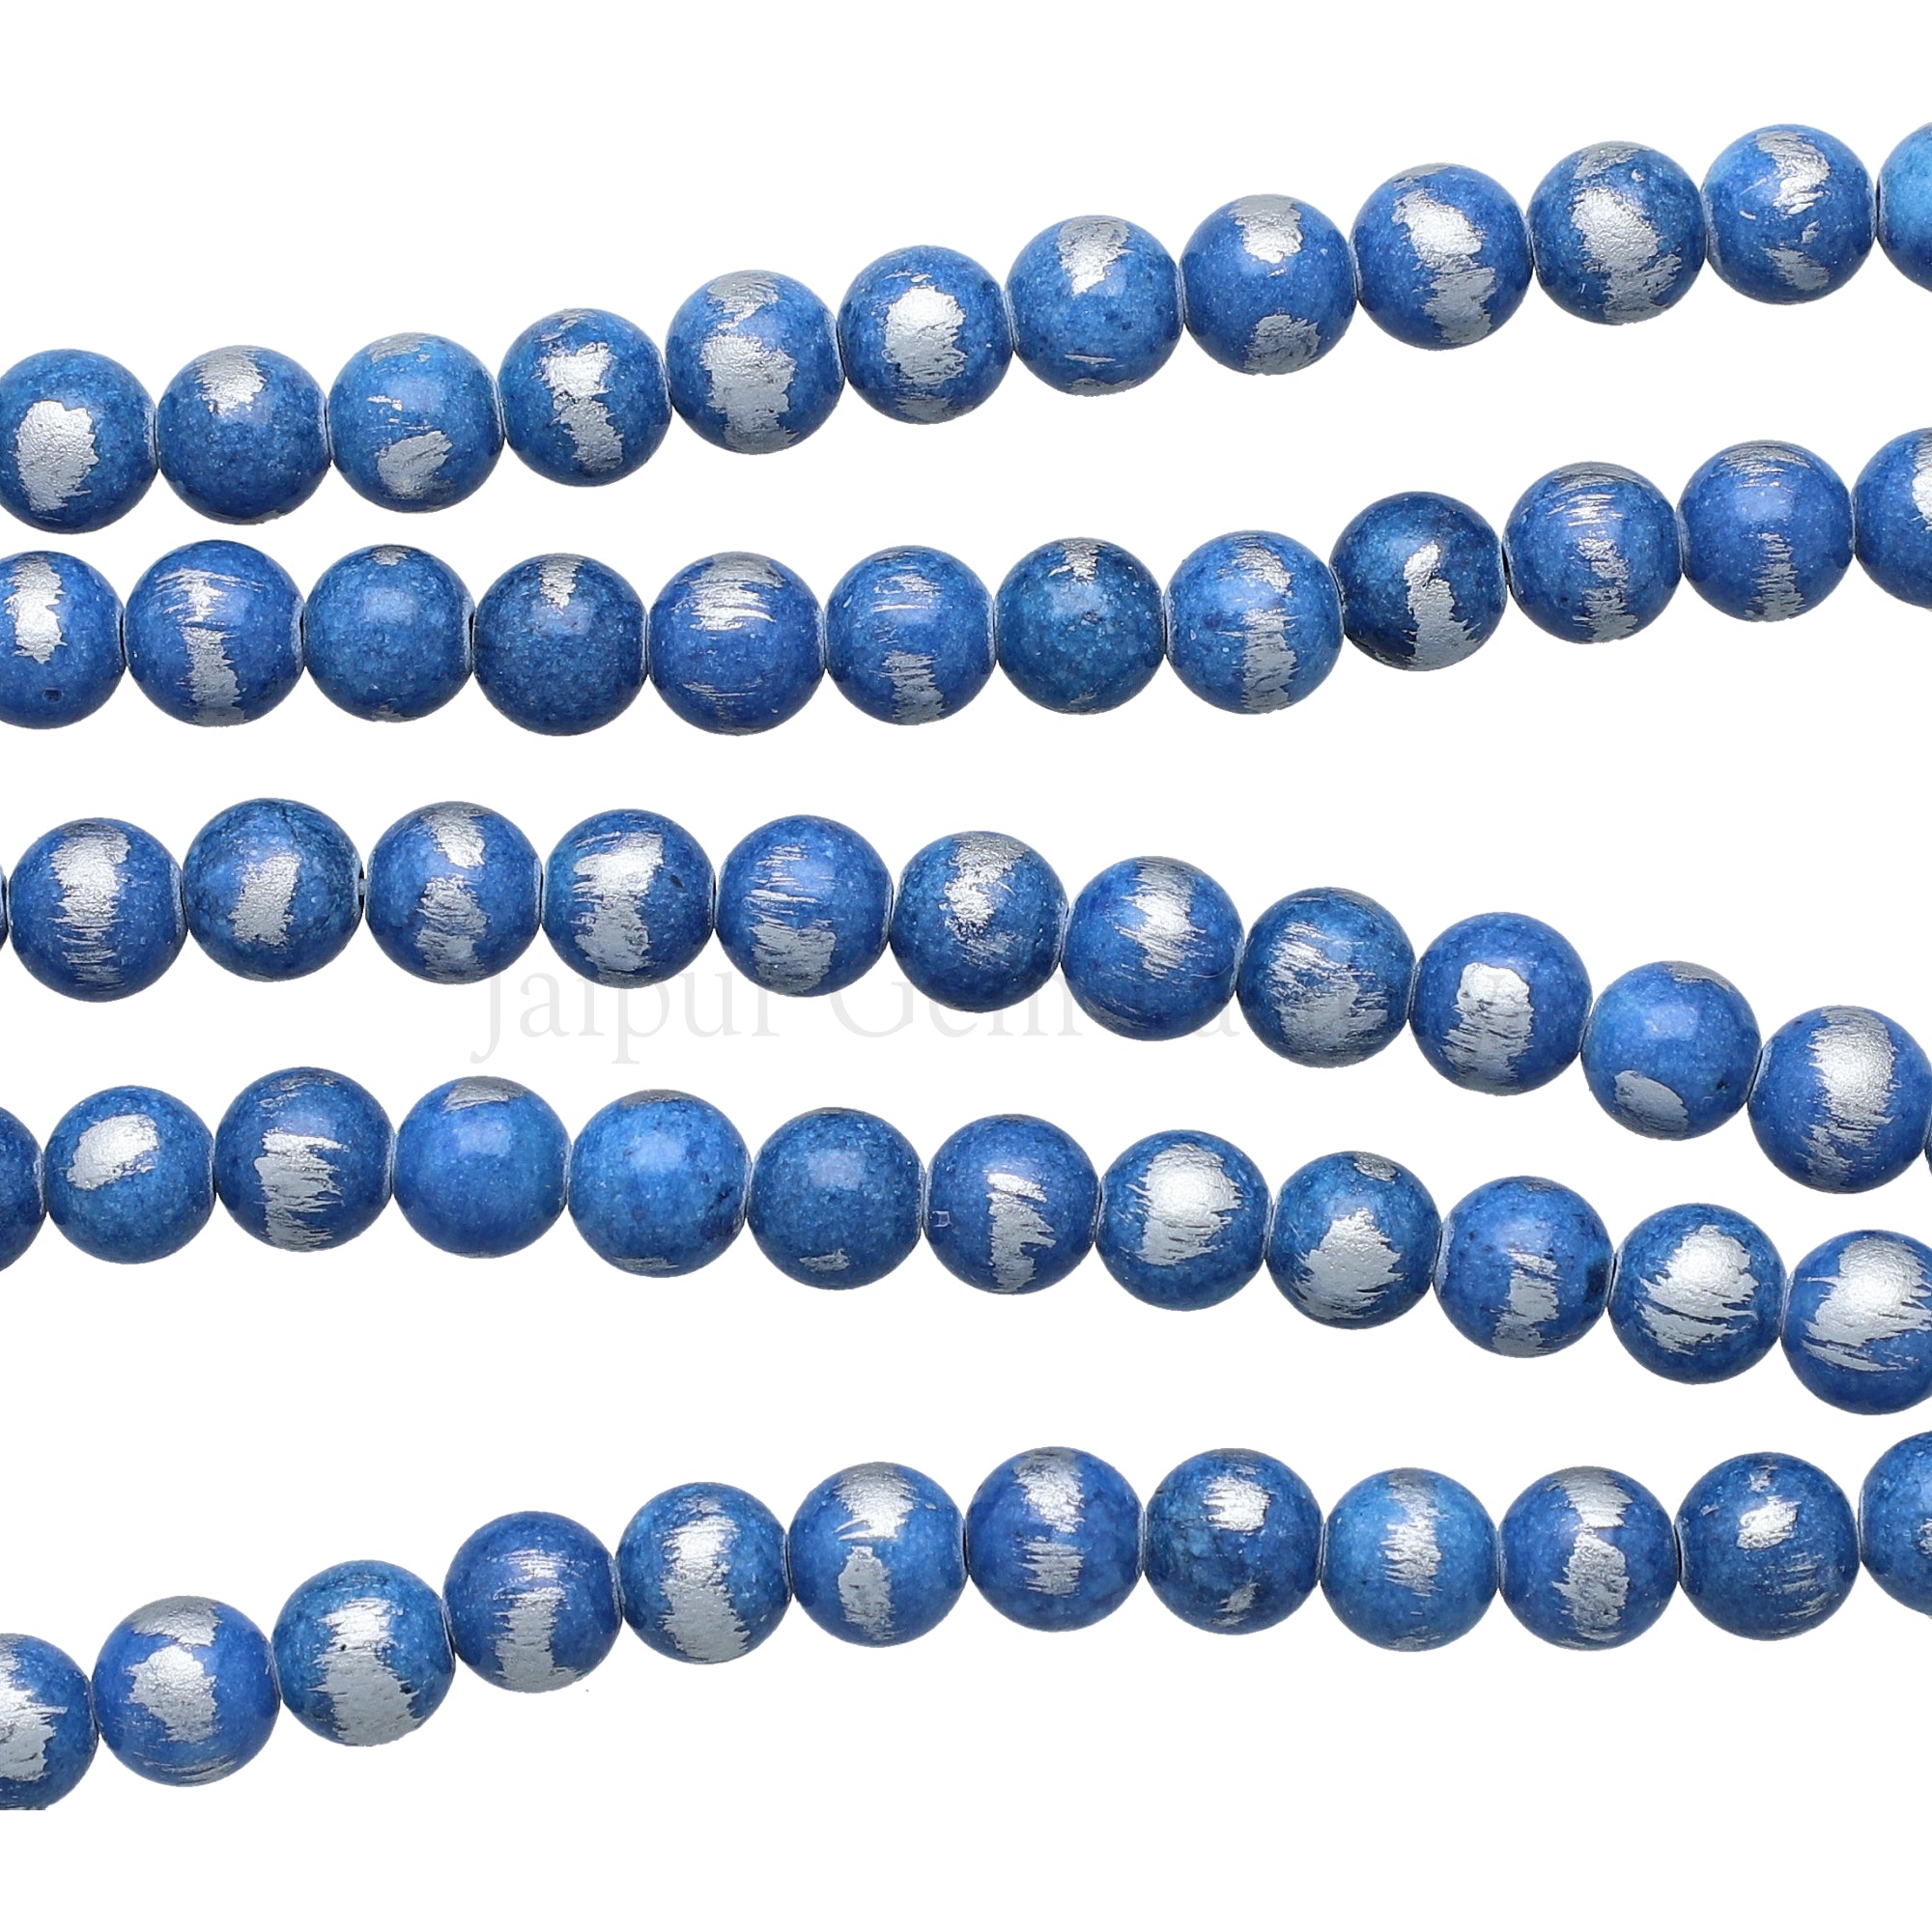 8 MM Denim Blue With Silver Foil Jade Smooth Round Beads 15 Inches Strand